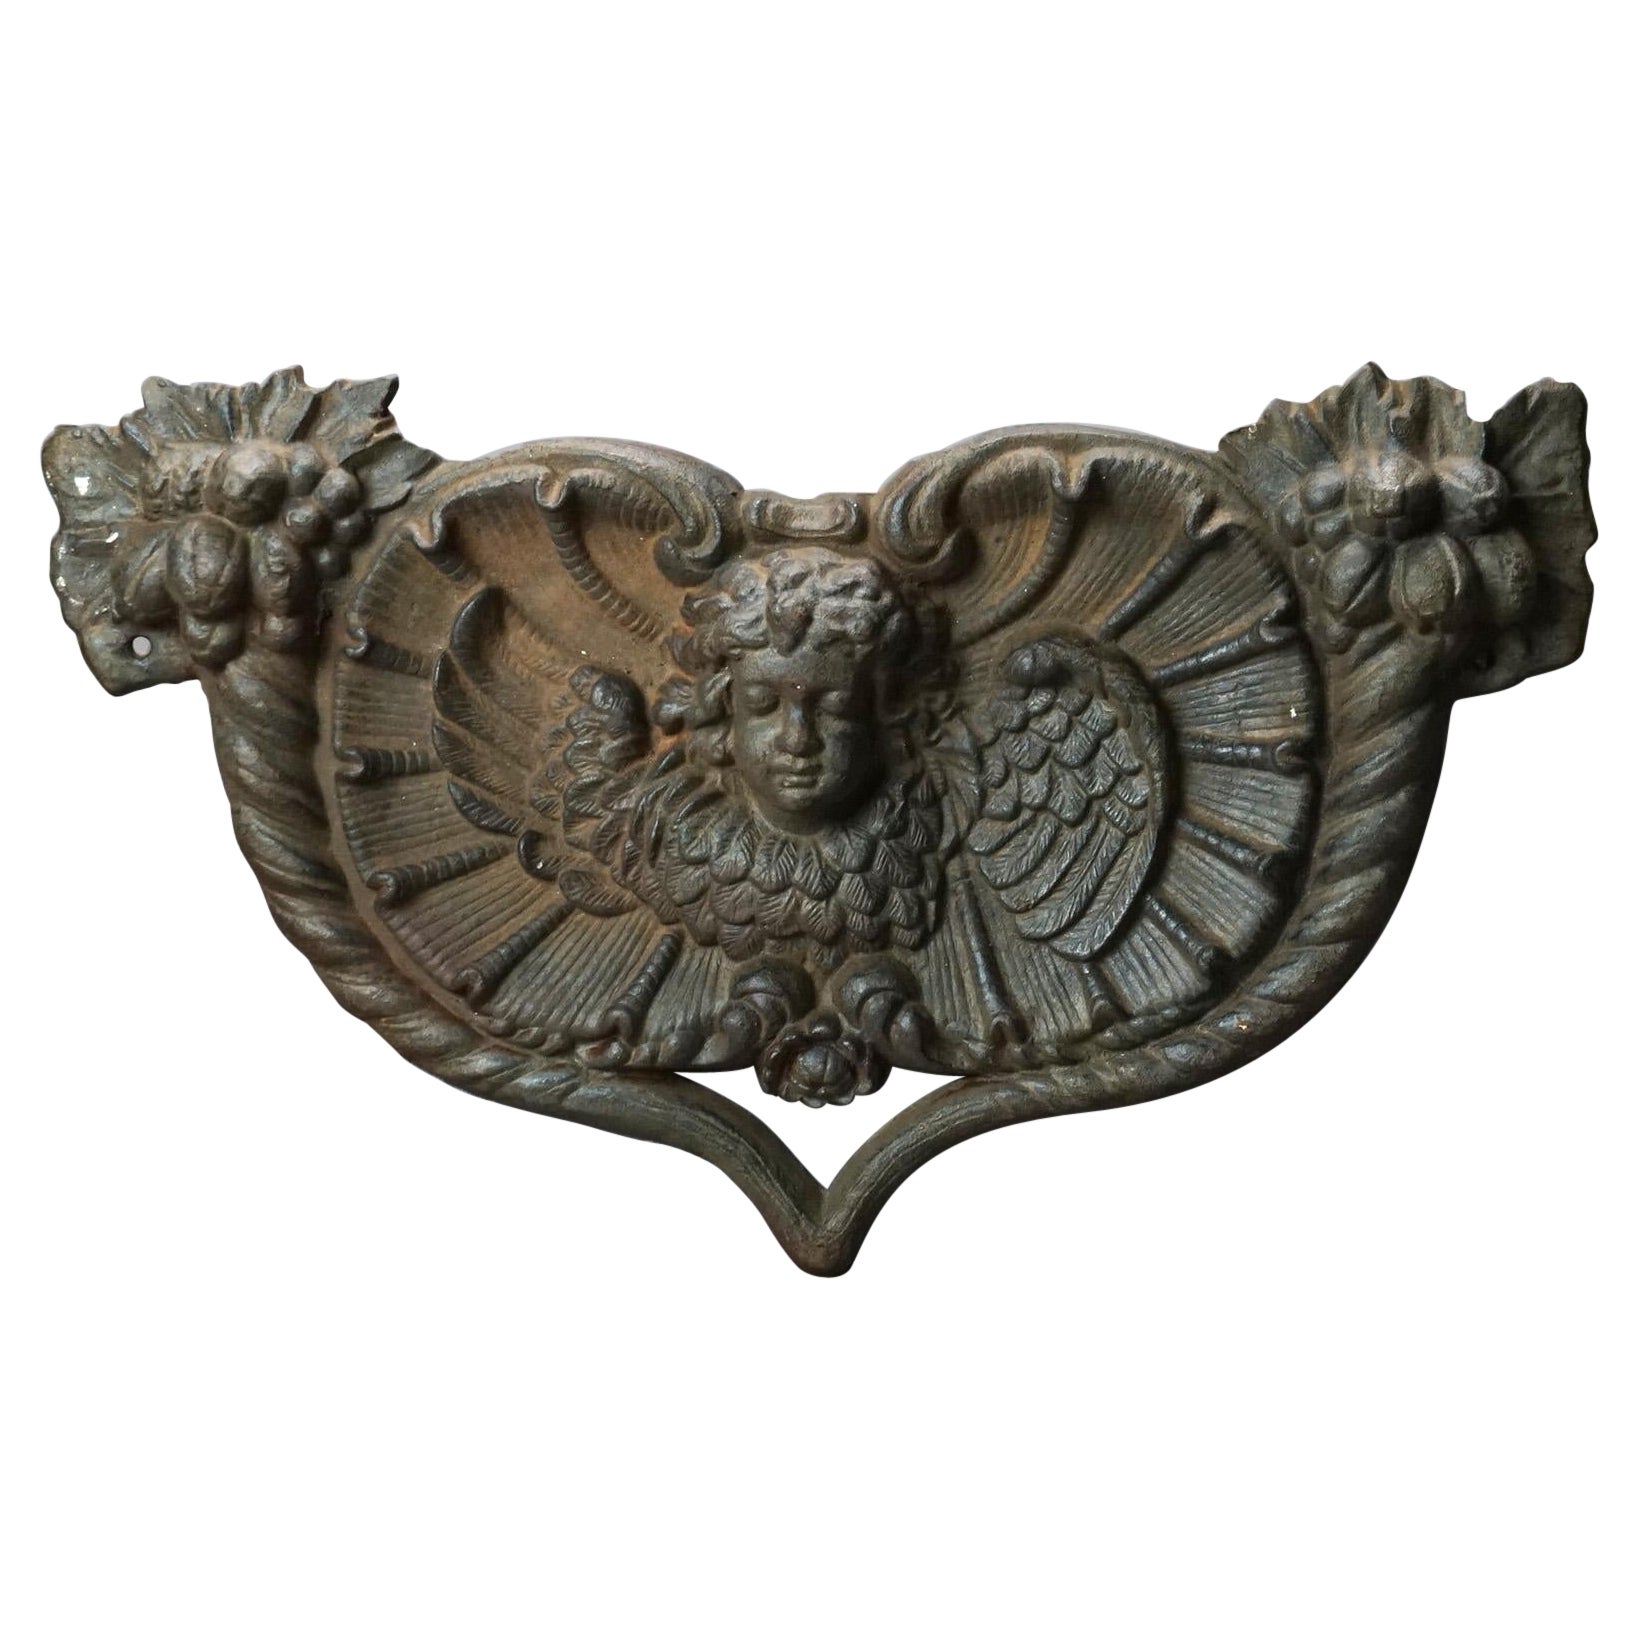 Figural Cast Iron Embossed Cherub Architectural Wall Plaque 20thC For Sale